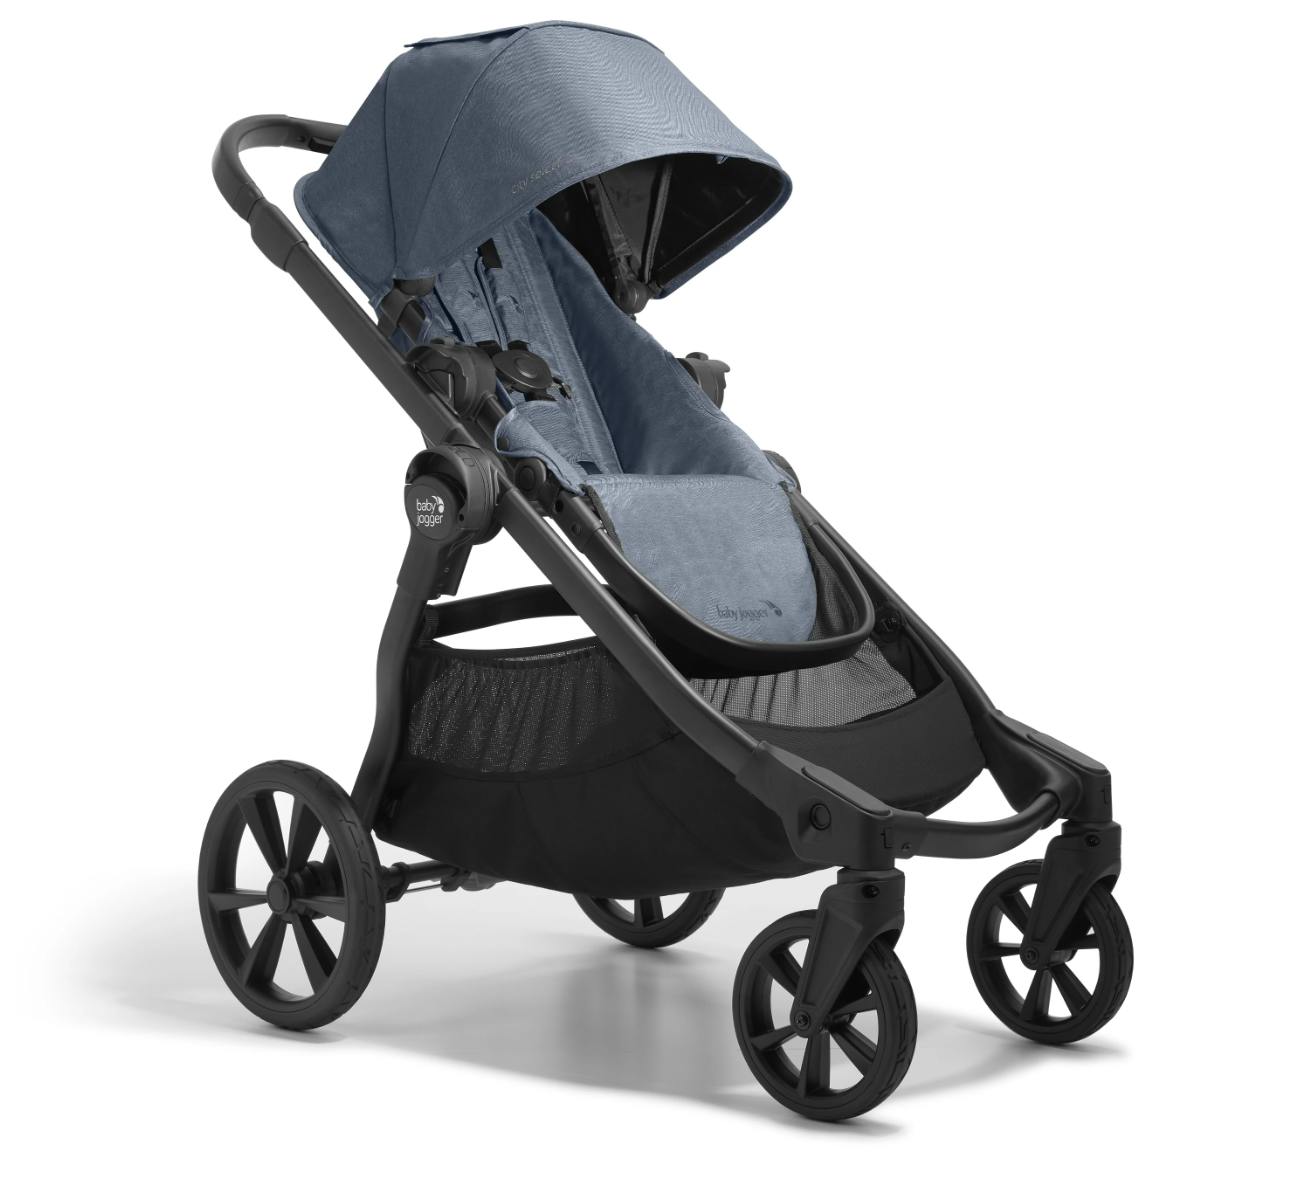 The Baby Jogger City Select 2.